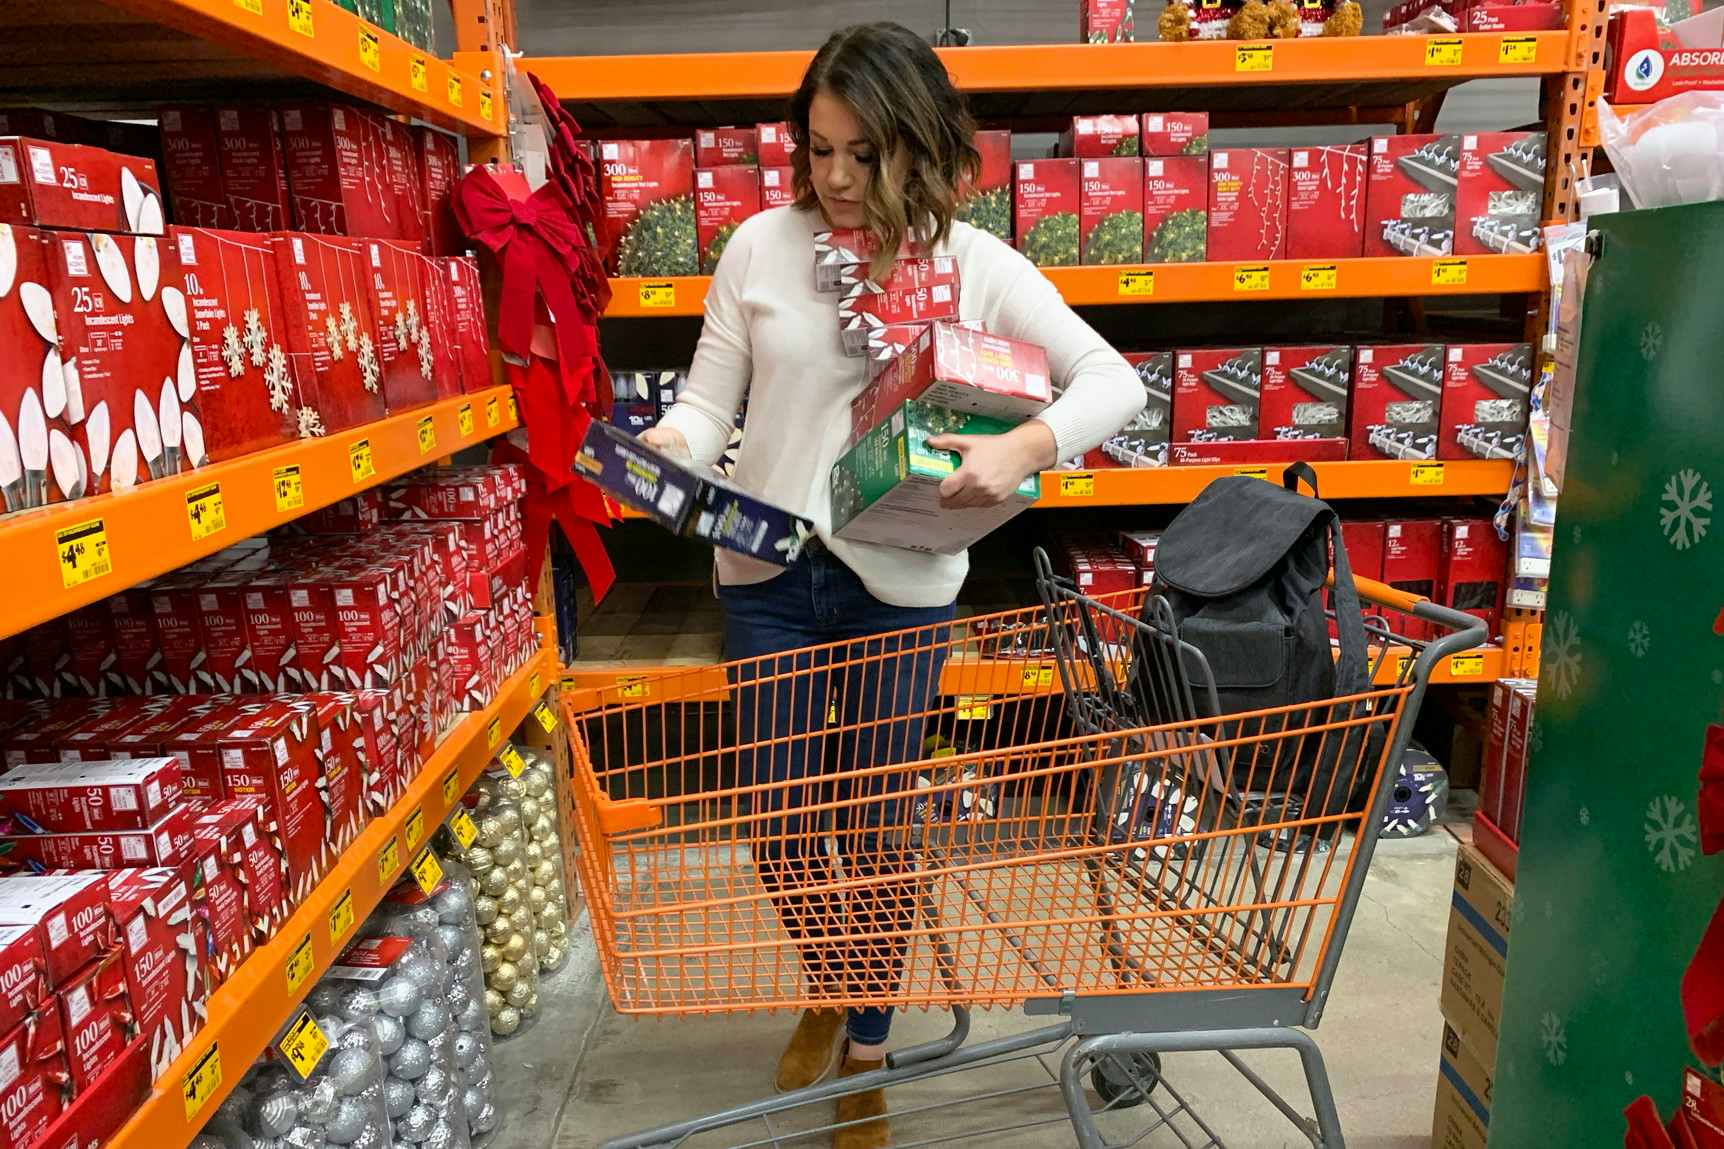 A woman shopping for after Christmas clearance at The Home Depot.